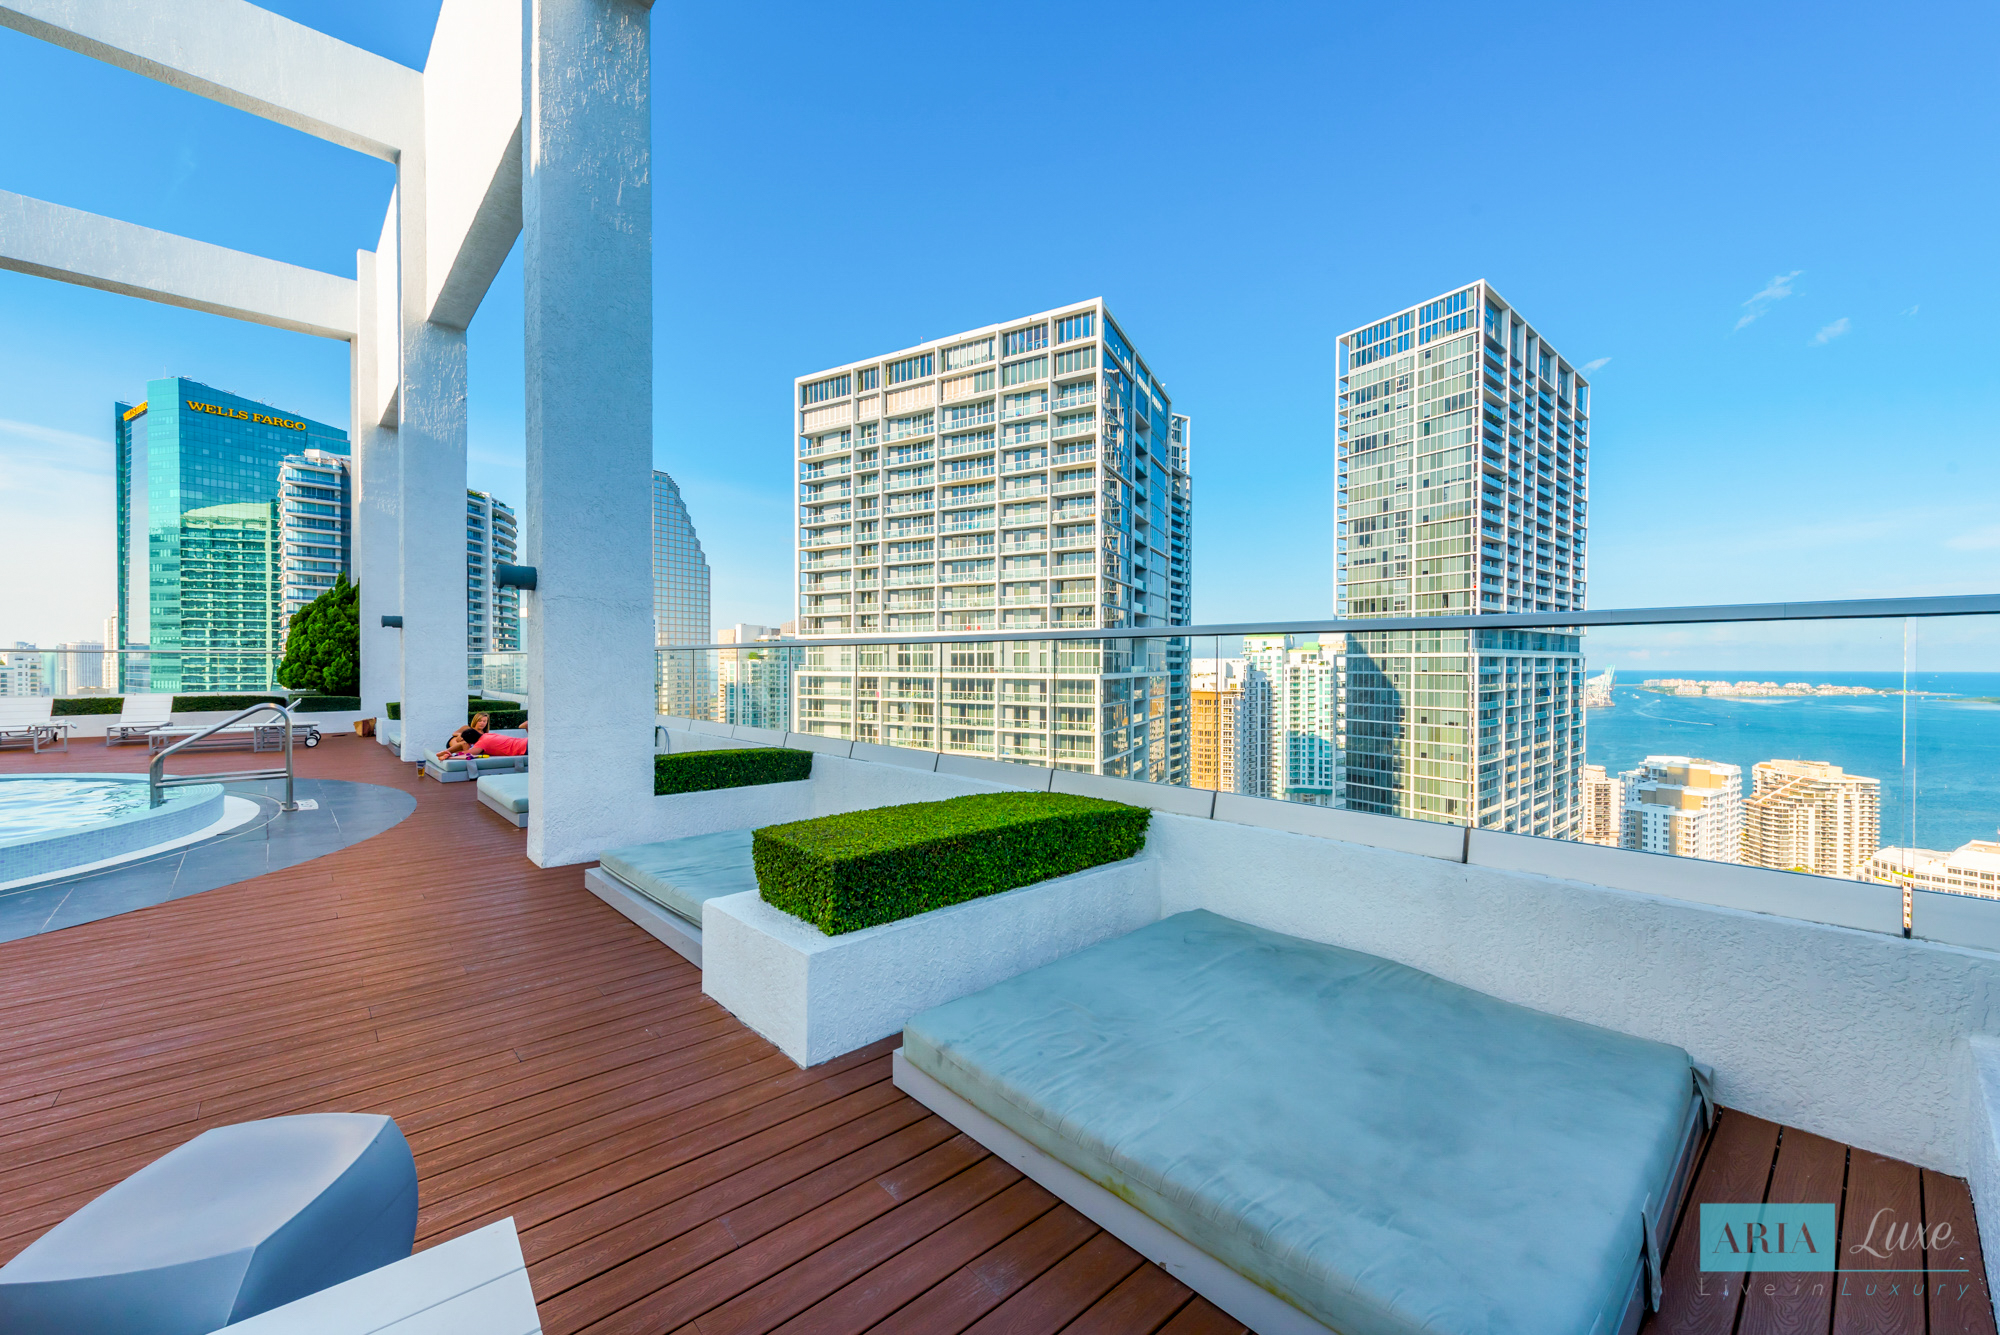 500 Brickell Upper Pool Deck Area with Lounge Chairs